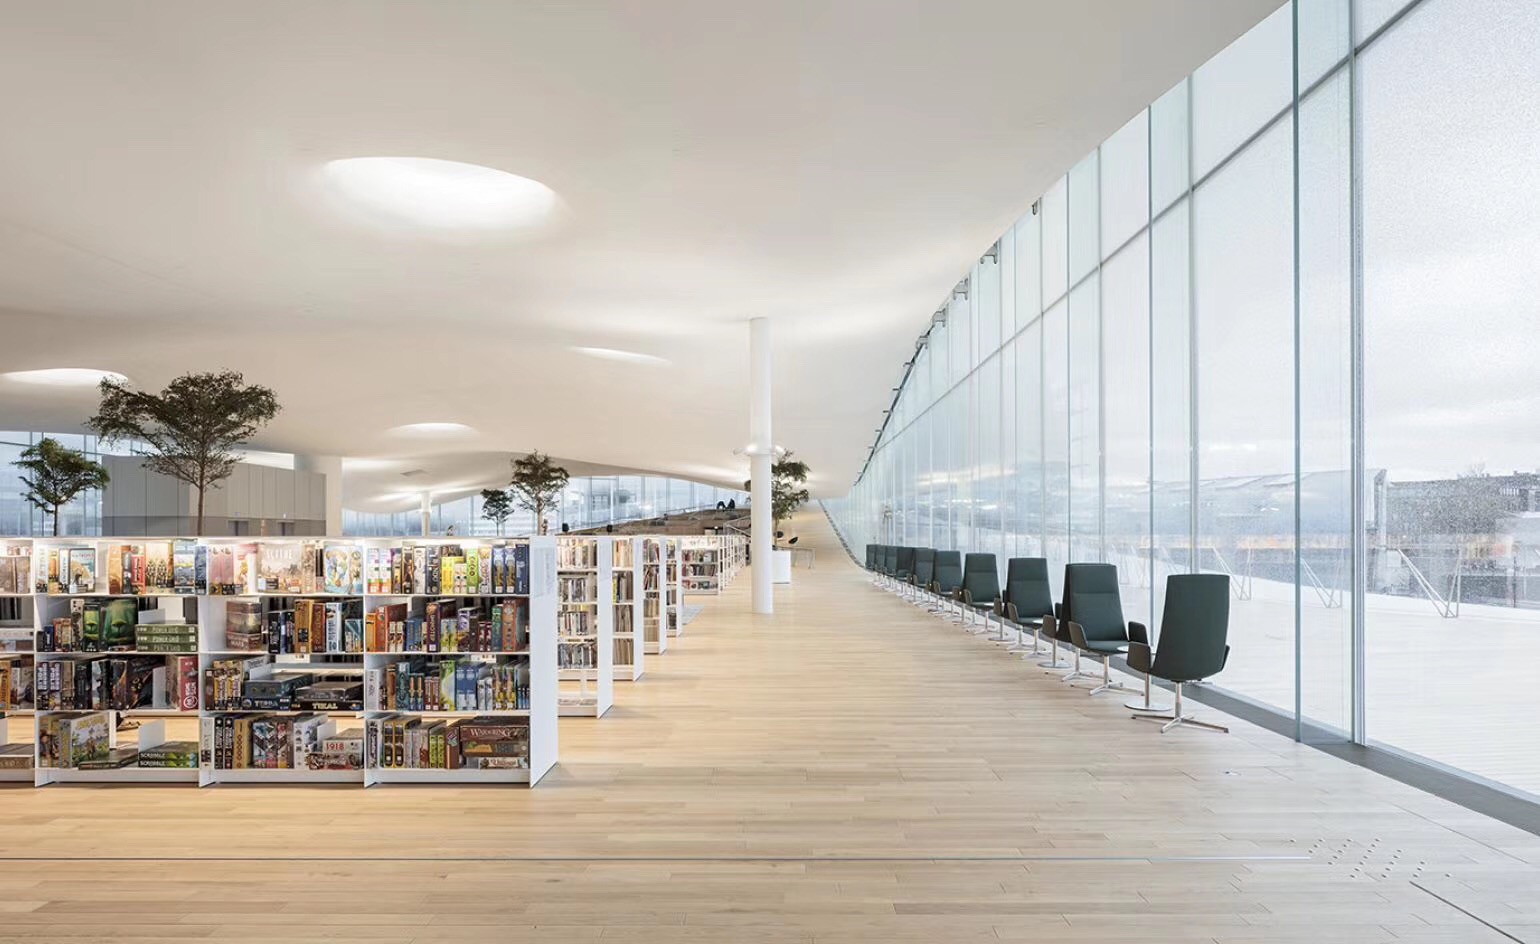 Helsinki opens a light-filled library as a national monument(图3)